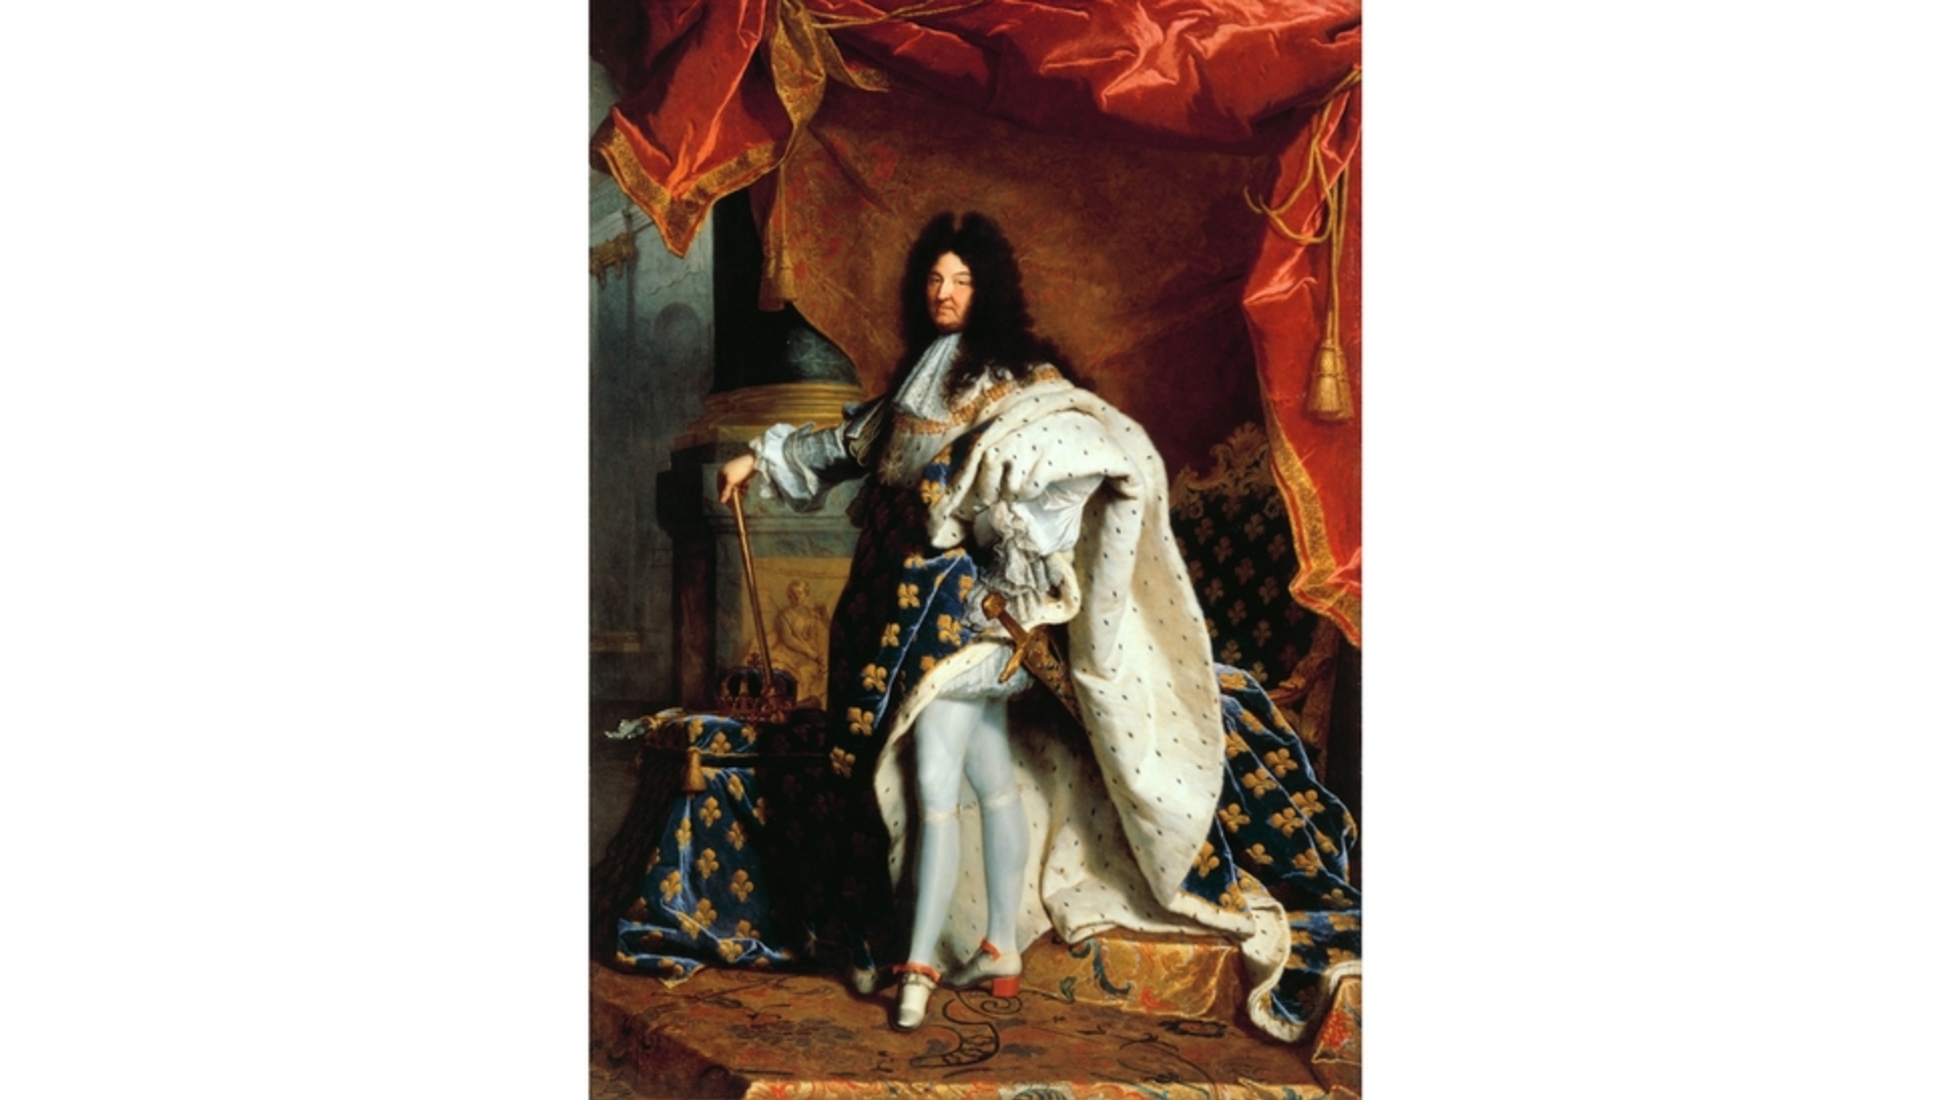 Louis XIV of France Wore Louboutin's?